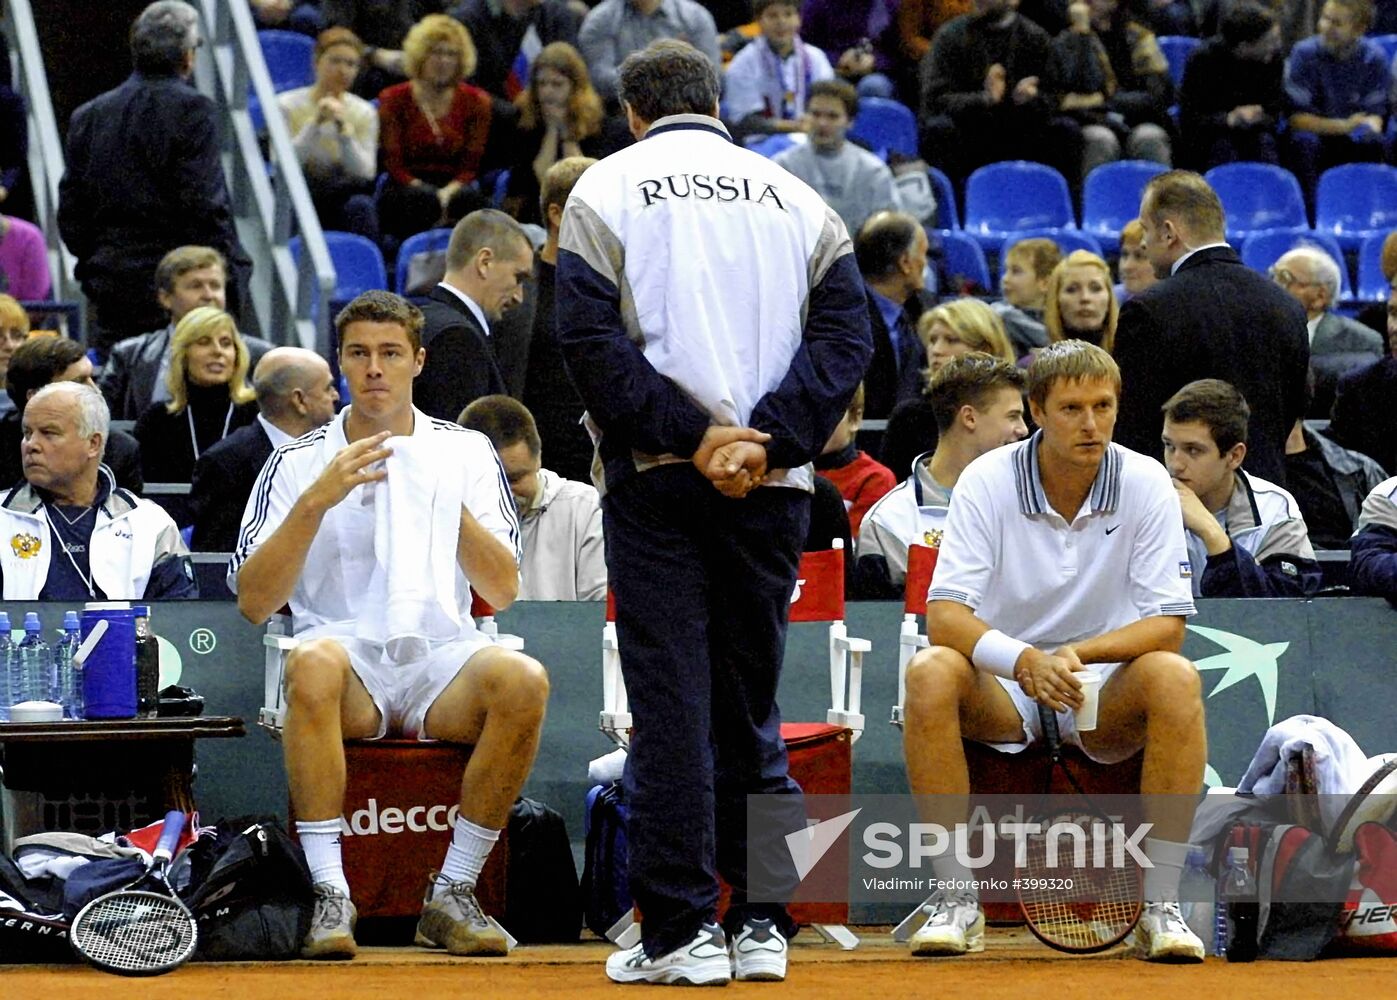 Tennis players Ye.Kafelnikov and M.Safin ready to play